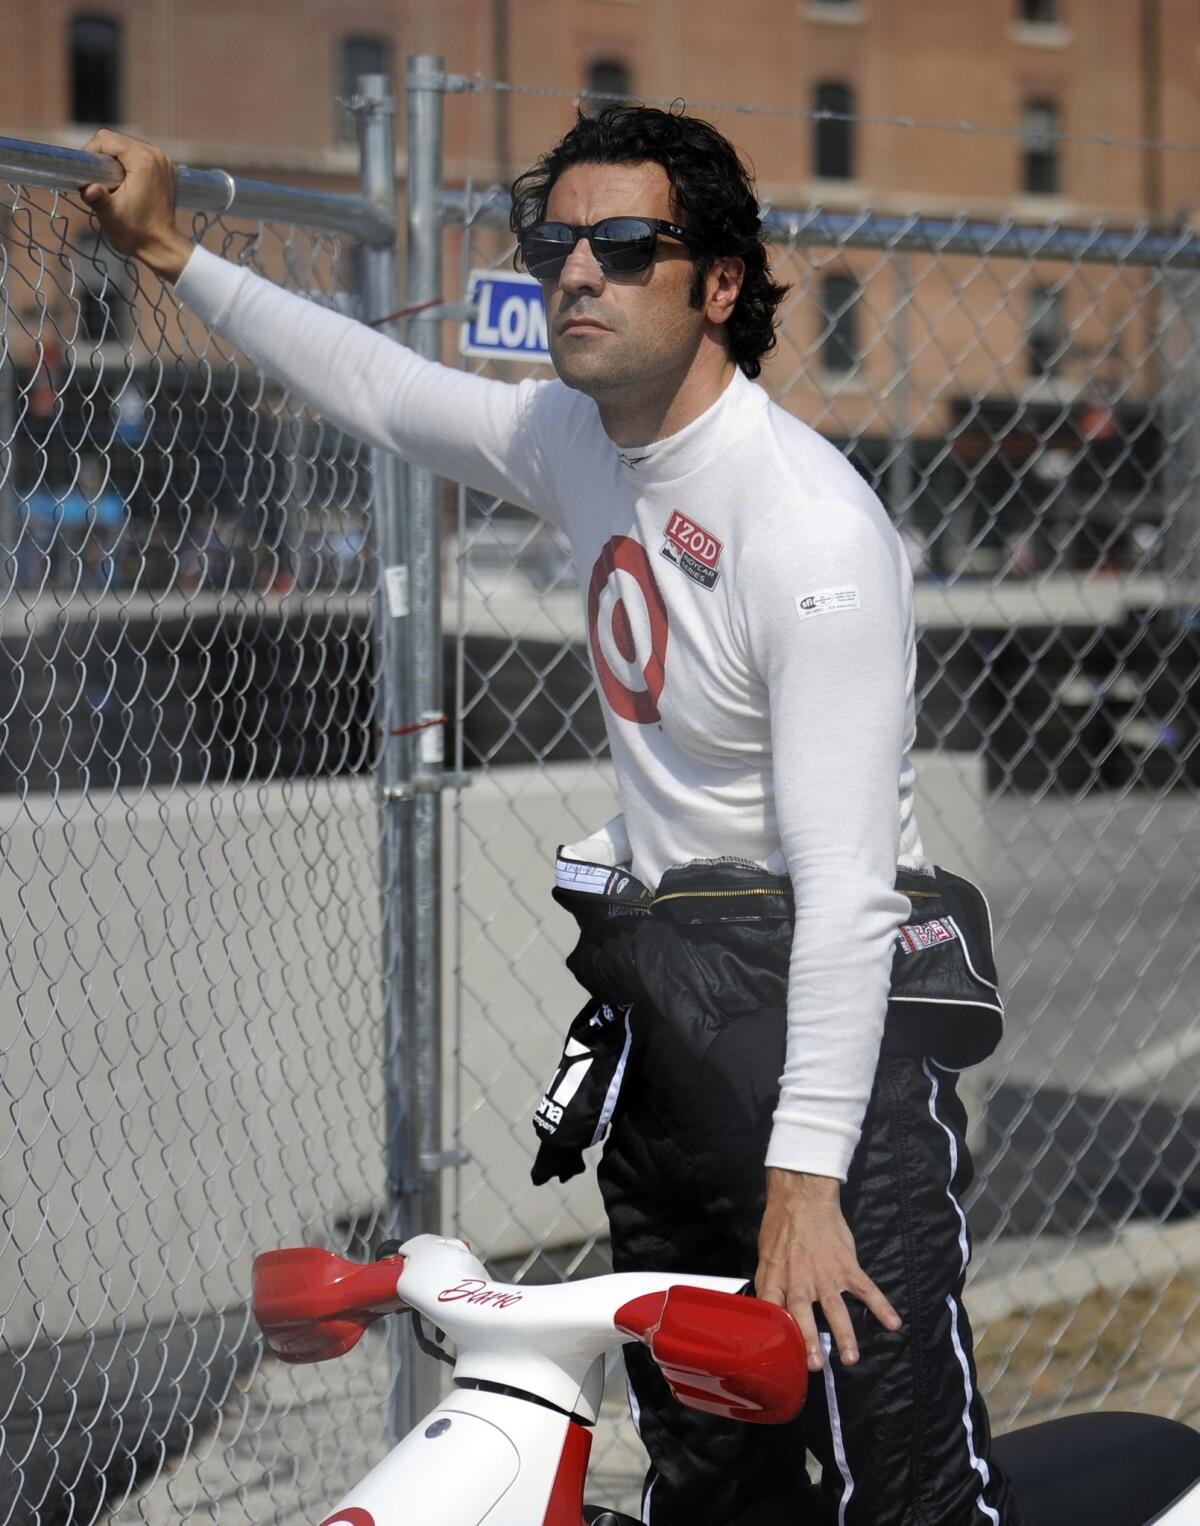 IndyCar Series driver Dario Franchitti underwent a three-hour surgery Monday to repair his right ankle.